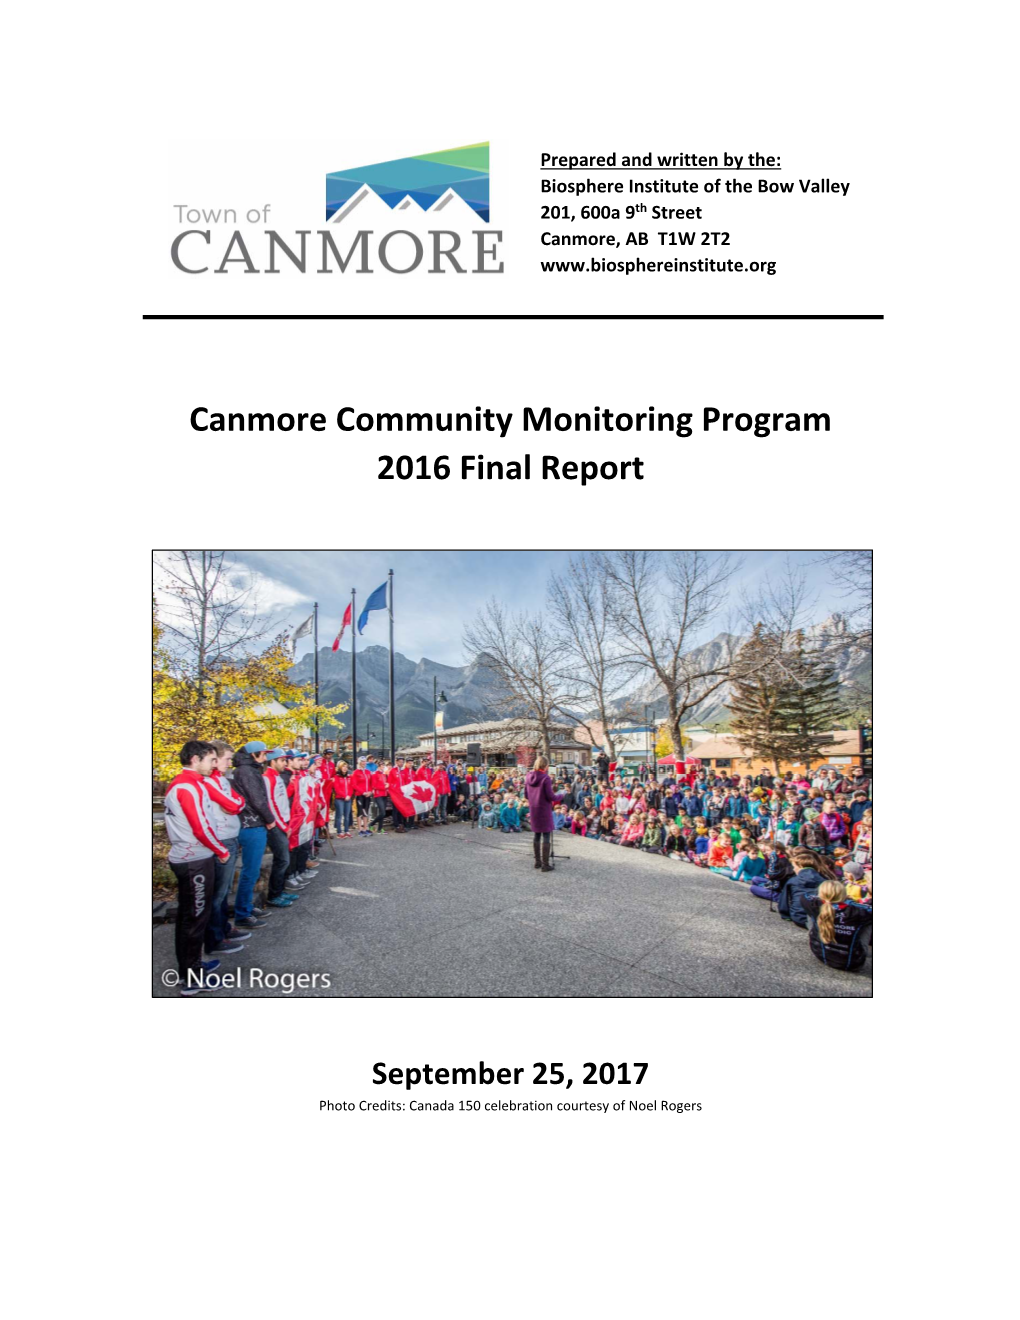 Canmore Community Monitoring Program 2016 Final Report